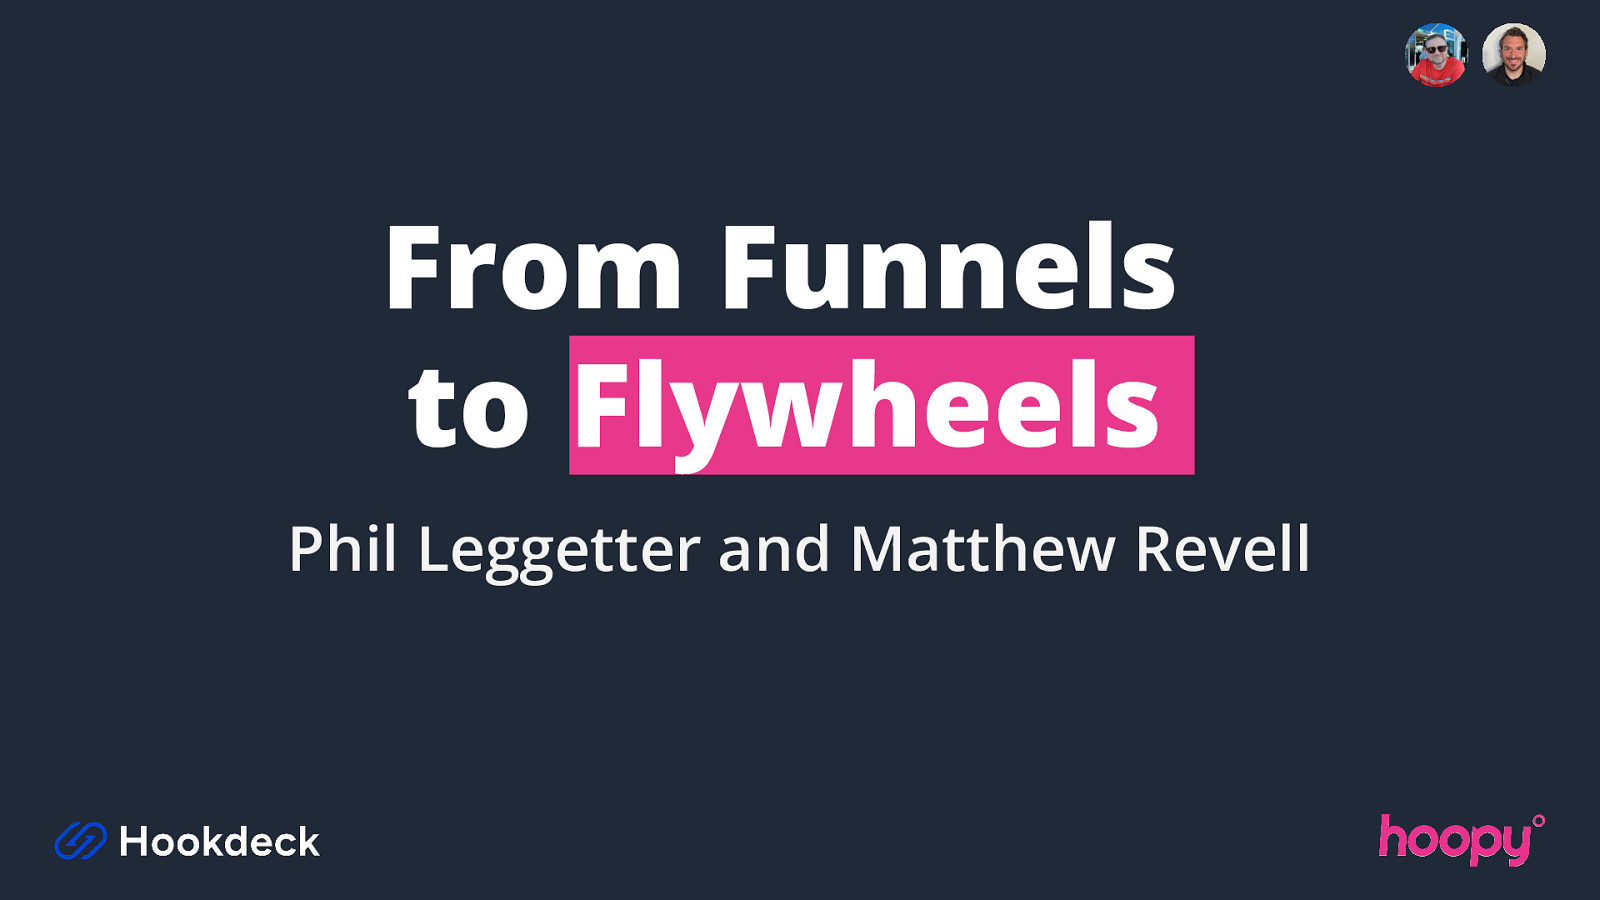 From funnels to flywheels: tools for thinking about DevRel